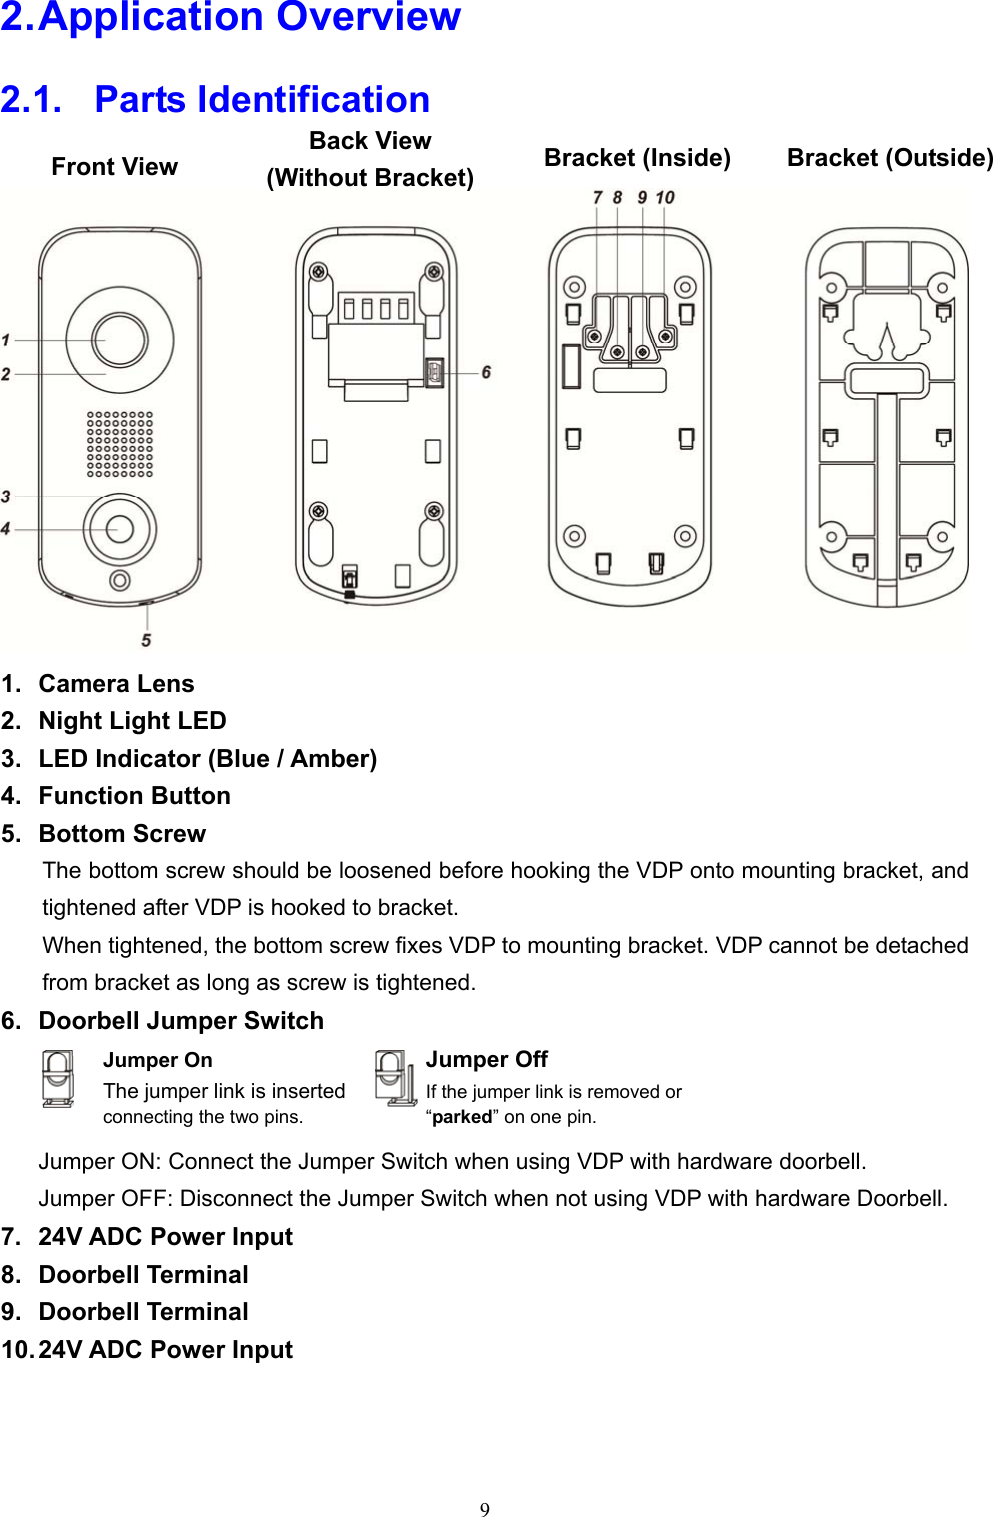 9  2. Application Overview 2.1.   Parts Identification   1.  Camera Lens 2.  Night Light LED 3.  LED Indicator (Blue / Amber) 4.  Function Button 5.  Bottom Screw The bottom screw should be loosened before hooking the VDP onto mounting bracket, and tightened after VDP is hooked to bracket. When tightened, the bottom screw fixes VDP to mounting bracket. VDP cannot be detached from bracket as long as screw is tightened. 6.  Doorbell Jumper Switch     Jumper ON: Connect the Jumper Switch when using VDP with hardware doorbell.   Jumper OFF: Disconnect the Jumper Switch when not using VDP with hardware Doorbell. 7.  24V ADC Power Input 8.  Doorbell Terminal 9.  Doorbell Terminal 10. 24V ADC Power Input   Front View Back View (Without Bracket)Bracket (Inside)  Bracket (Outside)Jumper On The jumper link is inserted connecting the two pins. Jumper Off If the jumper link is removed or “parked” on one pin. 